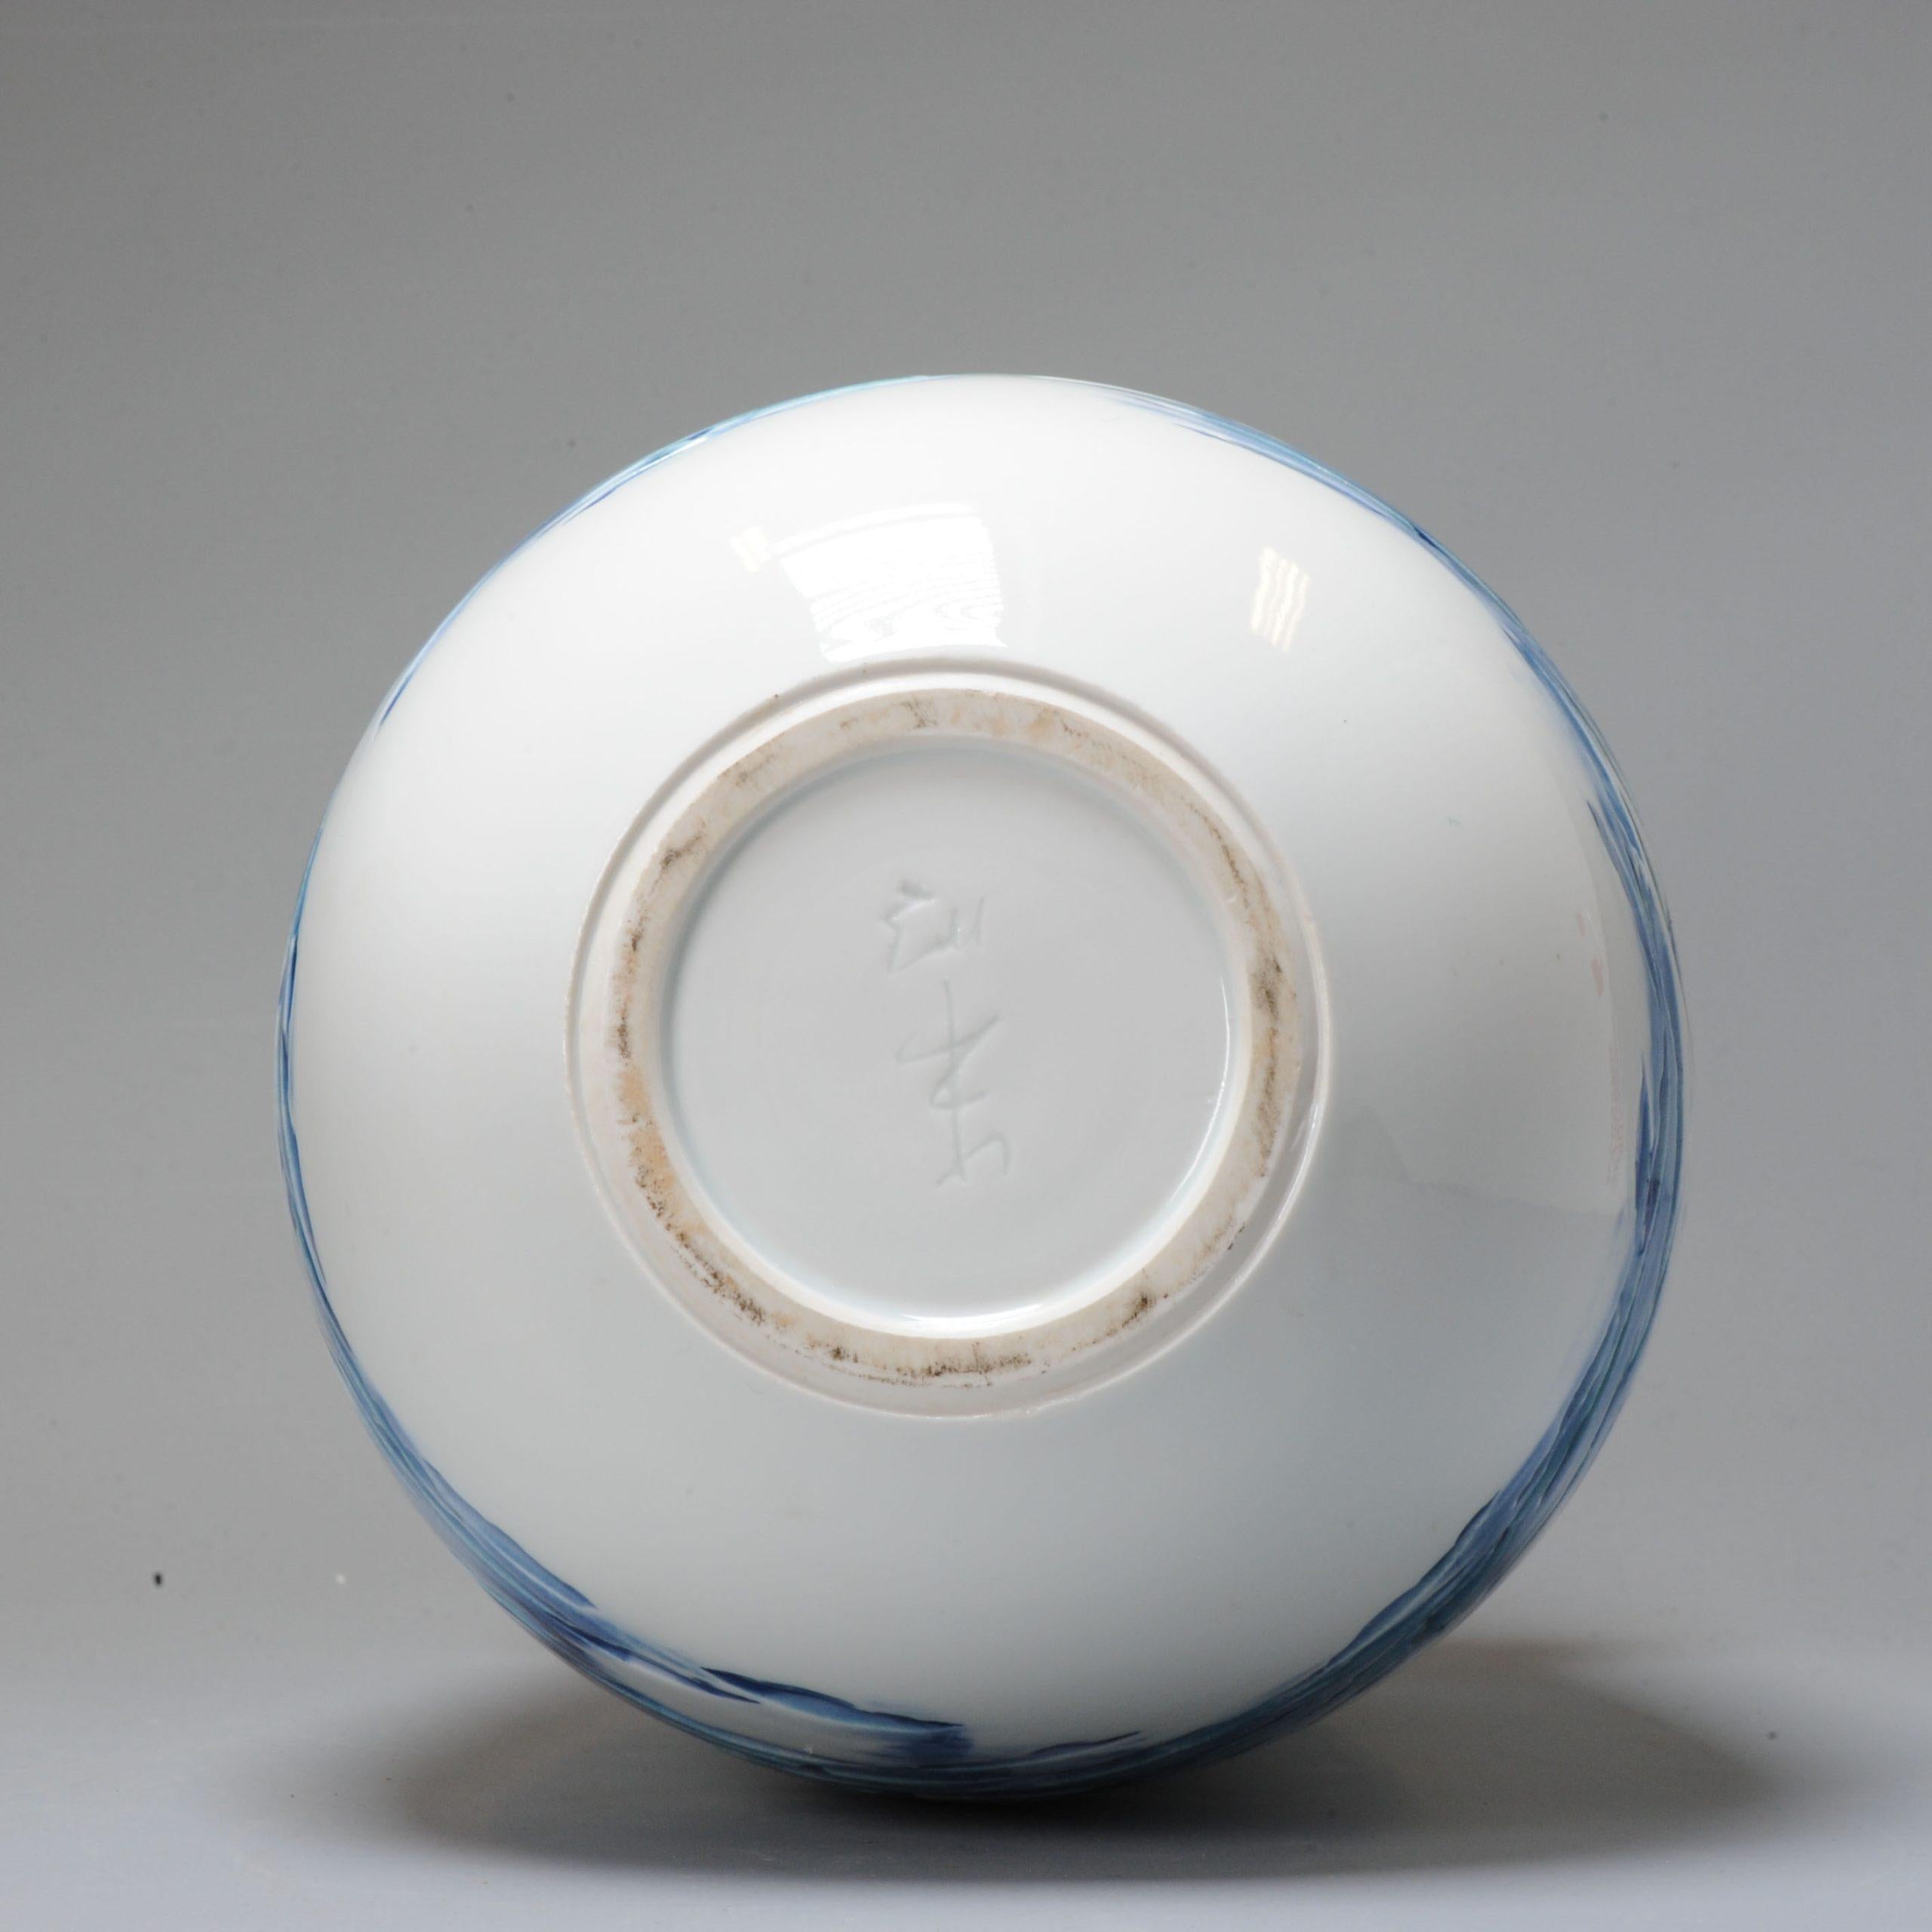 Lovely and rare piece.

A superb blue and white porcelain vase, with a scene of Ice and Snow. Made by Fuji Shumei. With matching box.

Fujii Mr. Aki Fujii's specialty is the technique of drawing a mountain by simulating the veins of a leaf, called